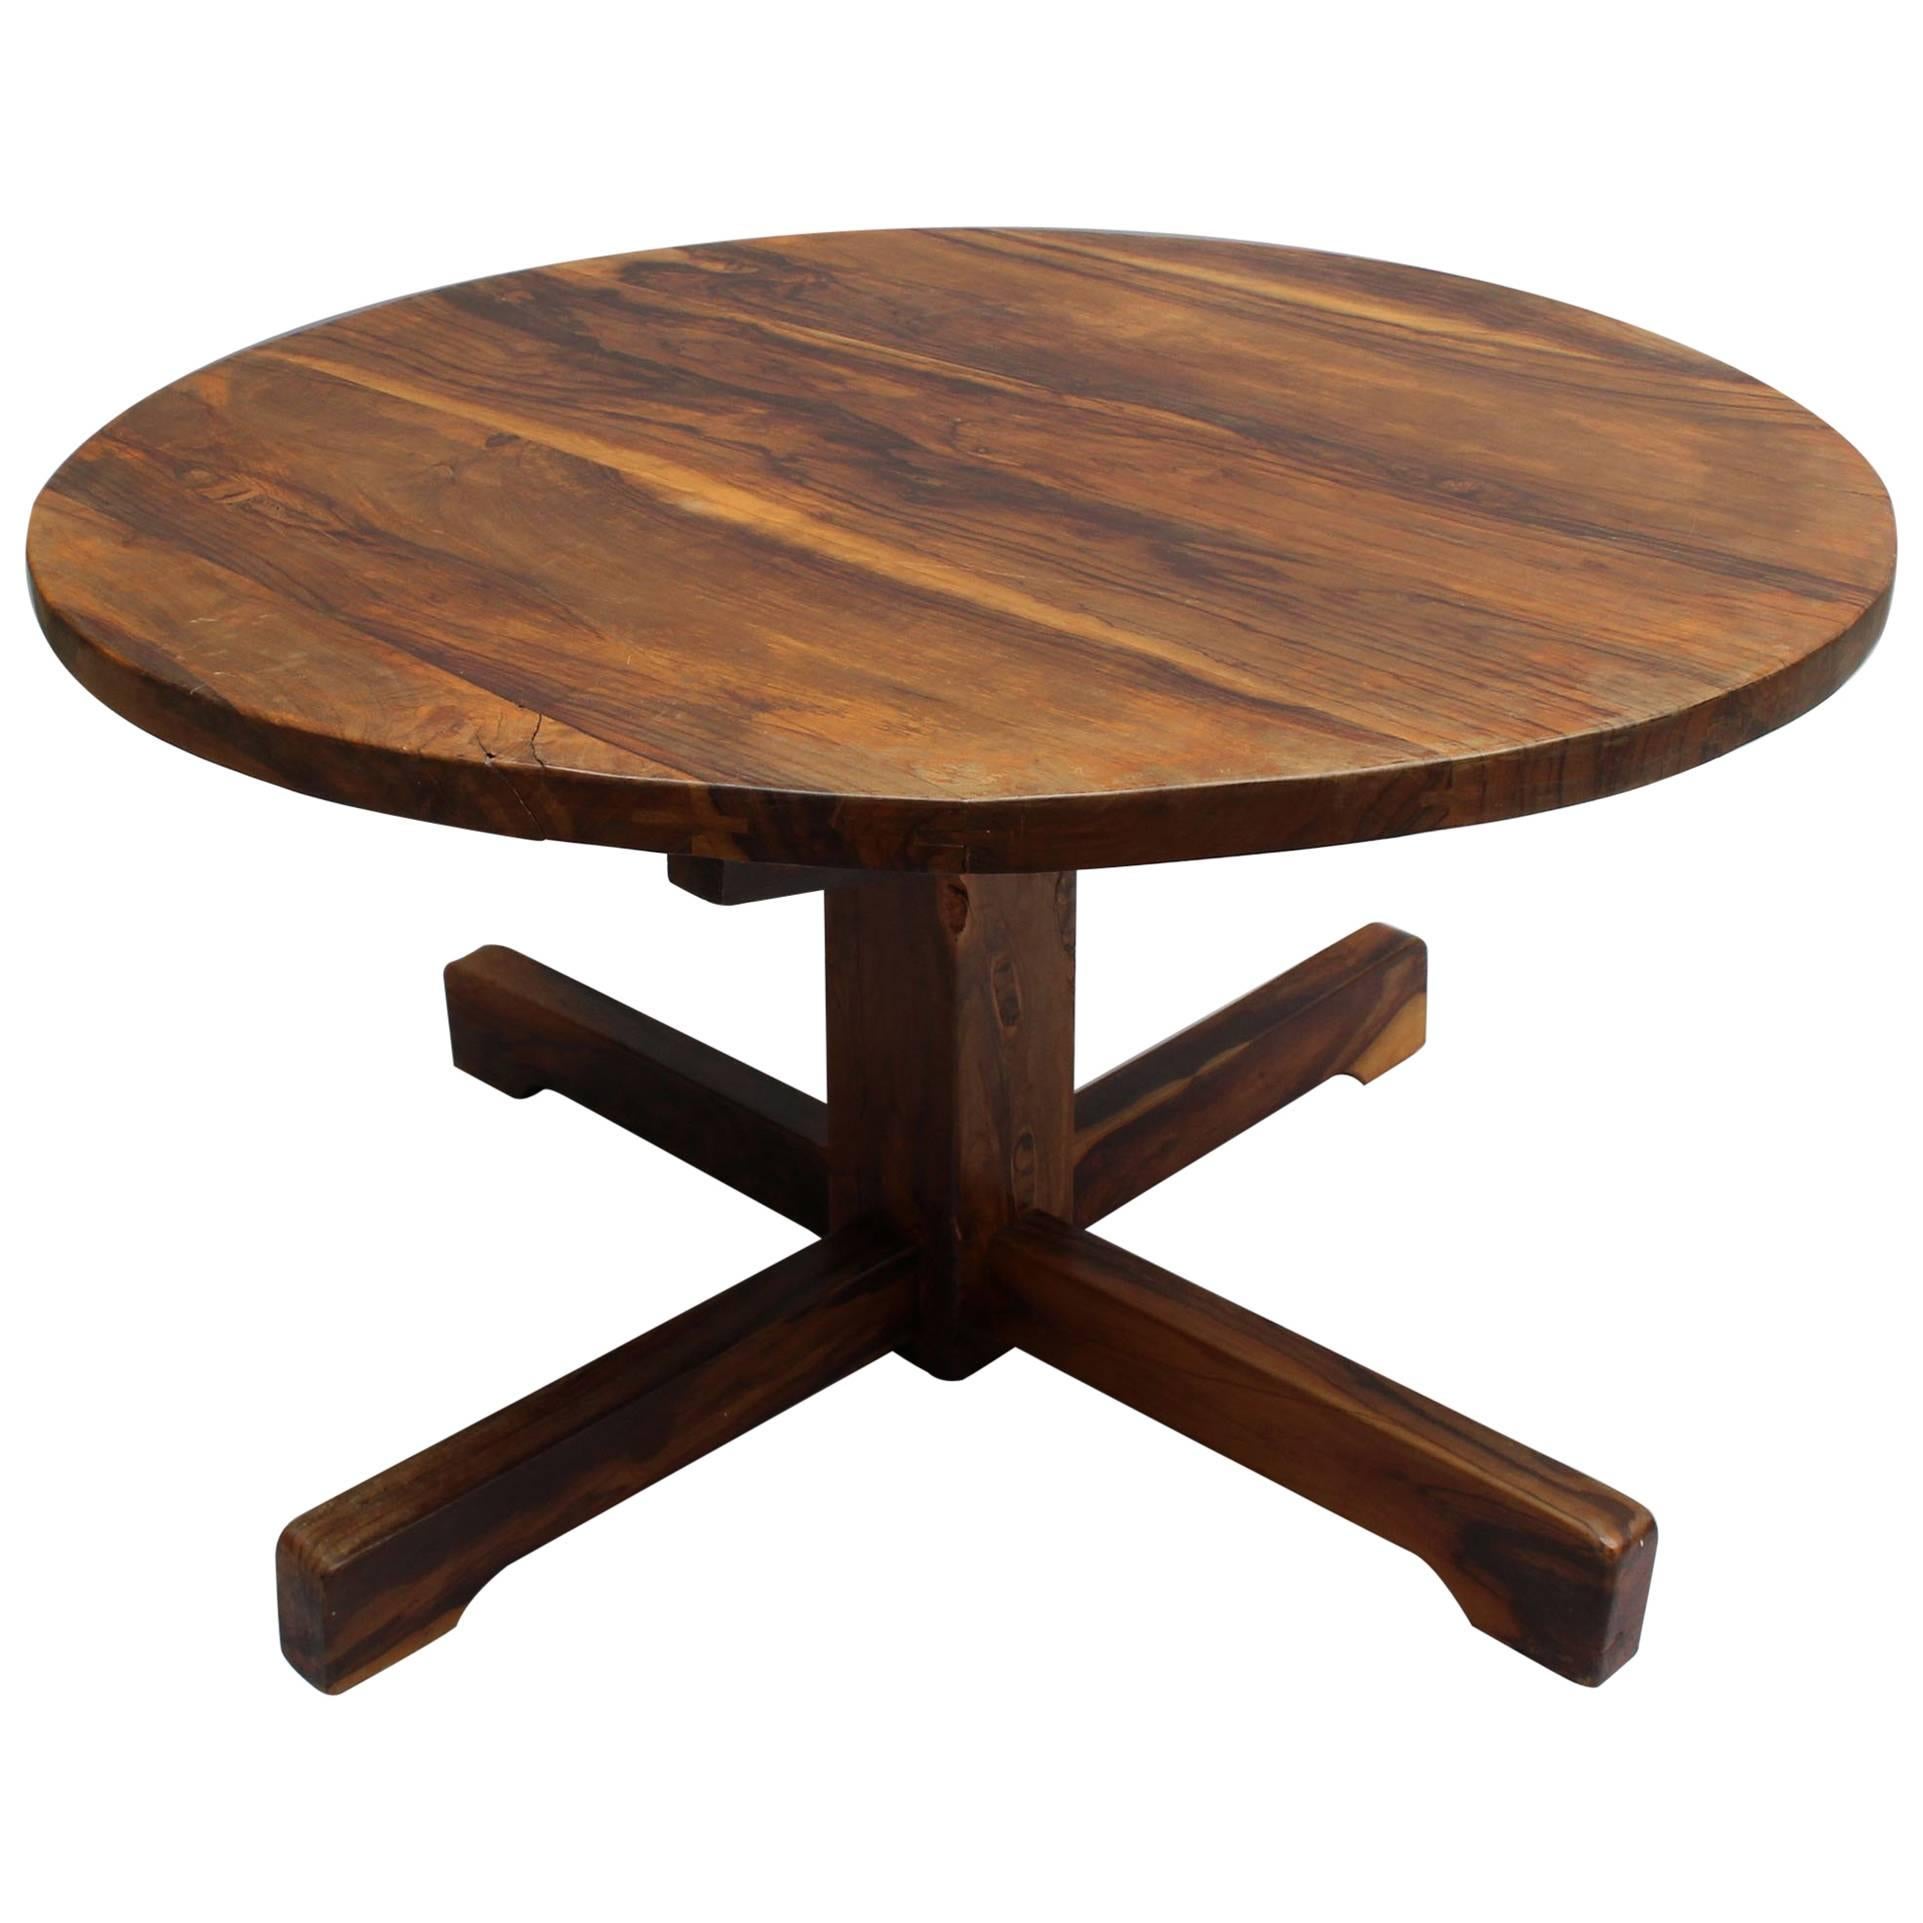 A French 1950's Solid Olive Tree Round Pedestal Dining / Center Table